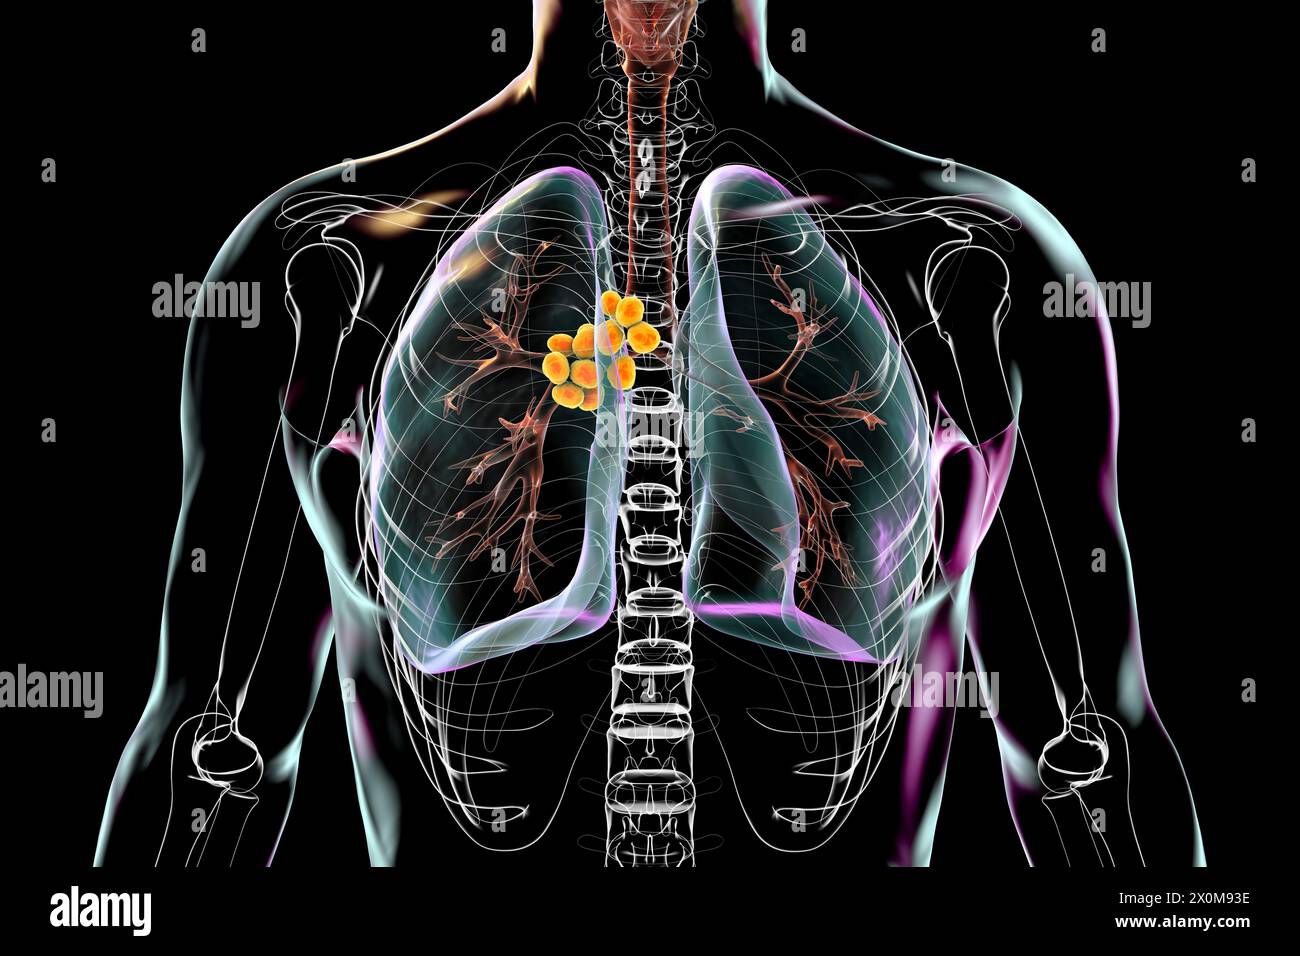 3D illustration of lungs affected by mediastinal lymphadenopathy . This is an enlargement of the lymph nodes found within the central thoracic (chest) cavity. There are multiple potential causes of mediastinal lymphadenopathy, including bacterial infection, cancer and genetic disease. Stock Photo